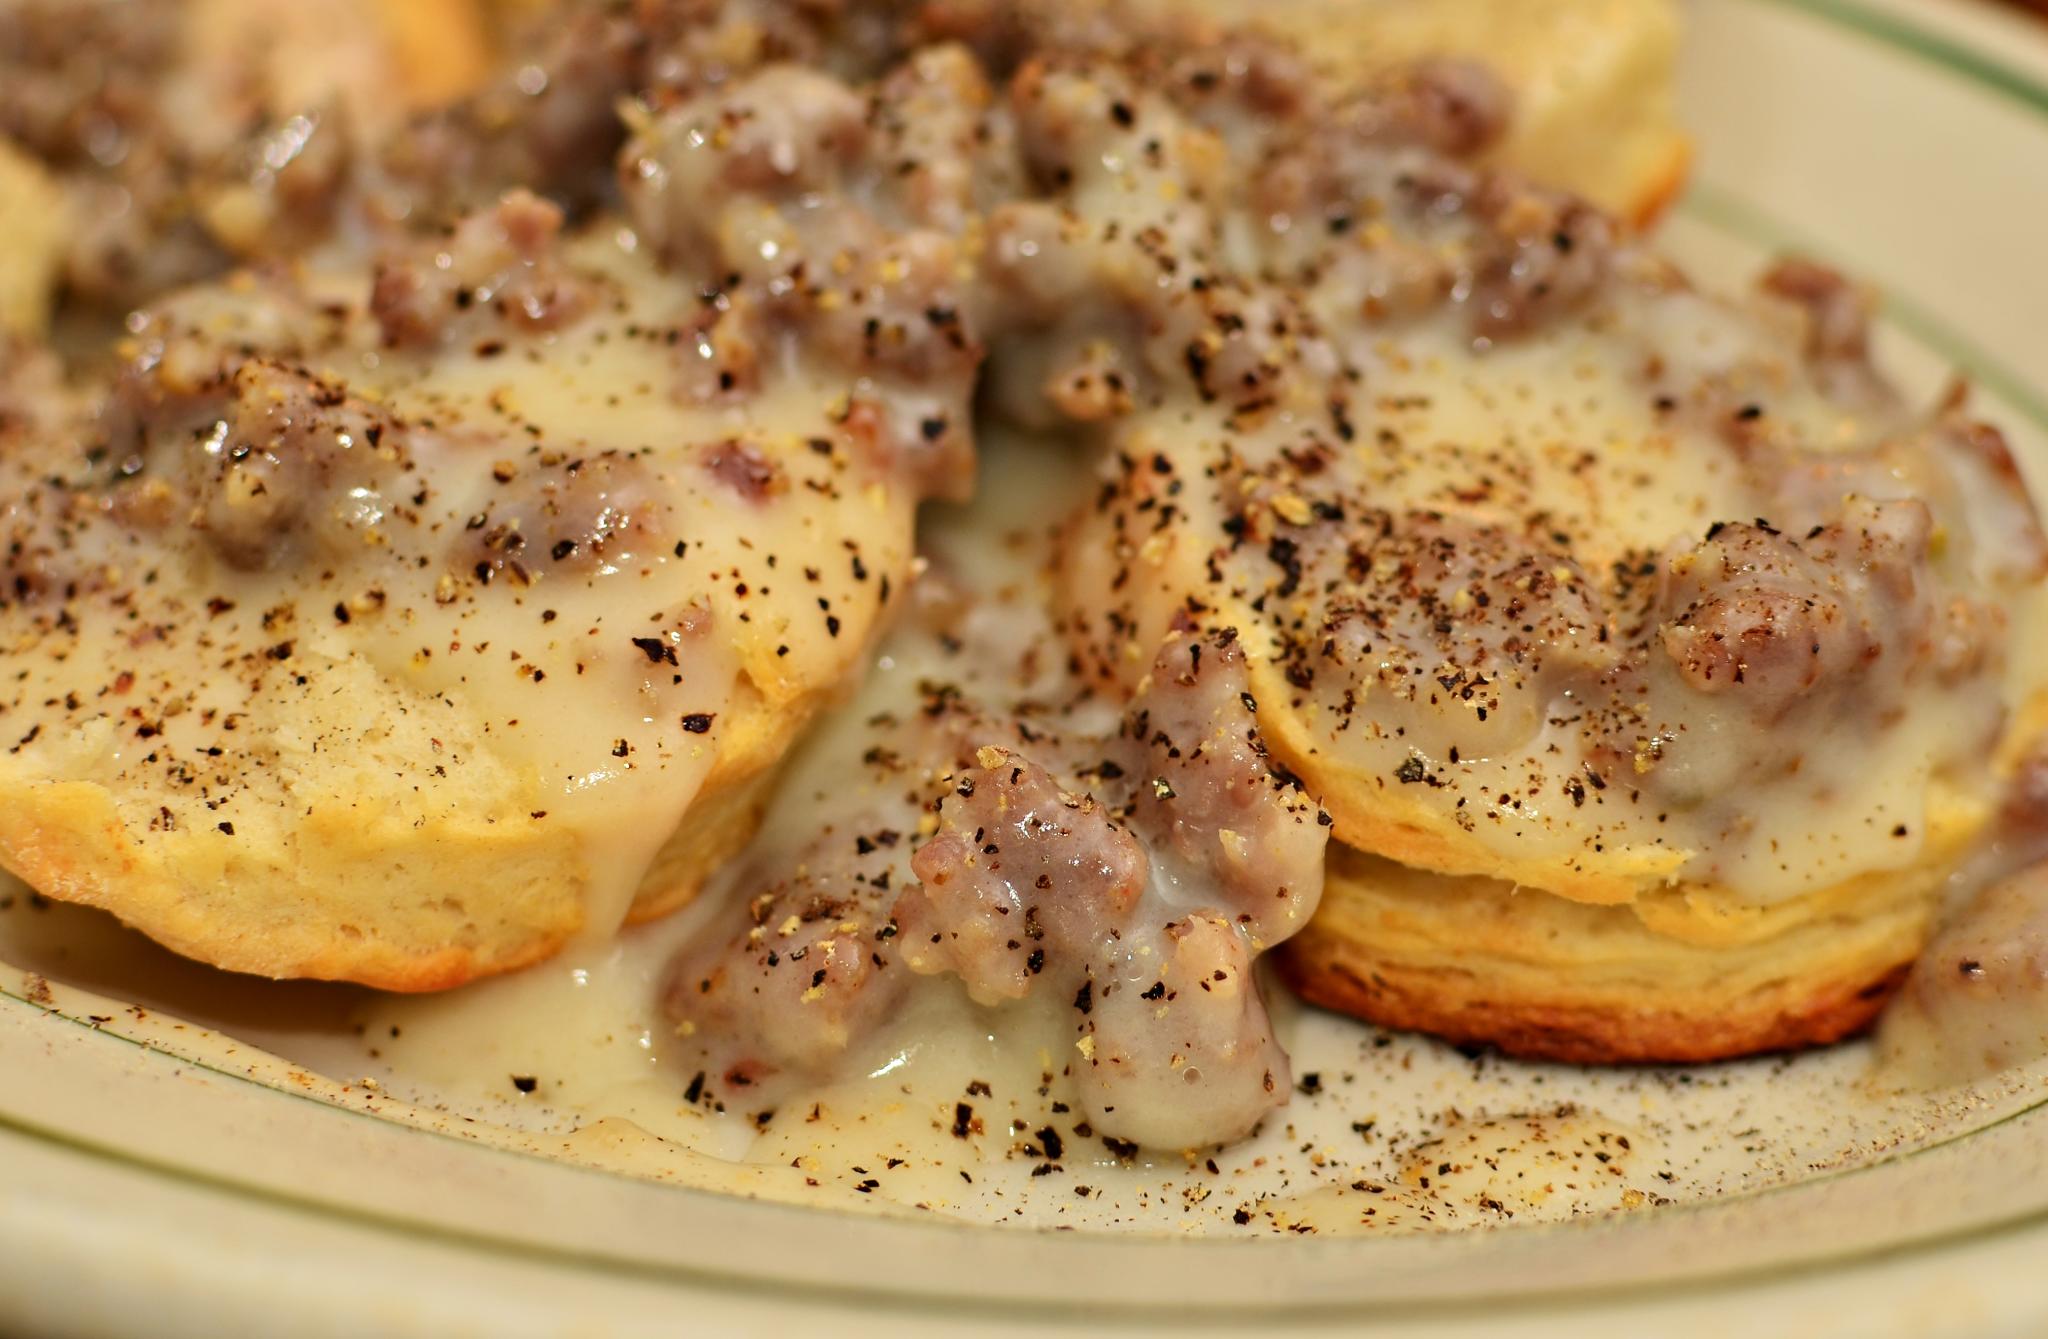 biscuits_and_sausage_gravy_6340833792